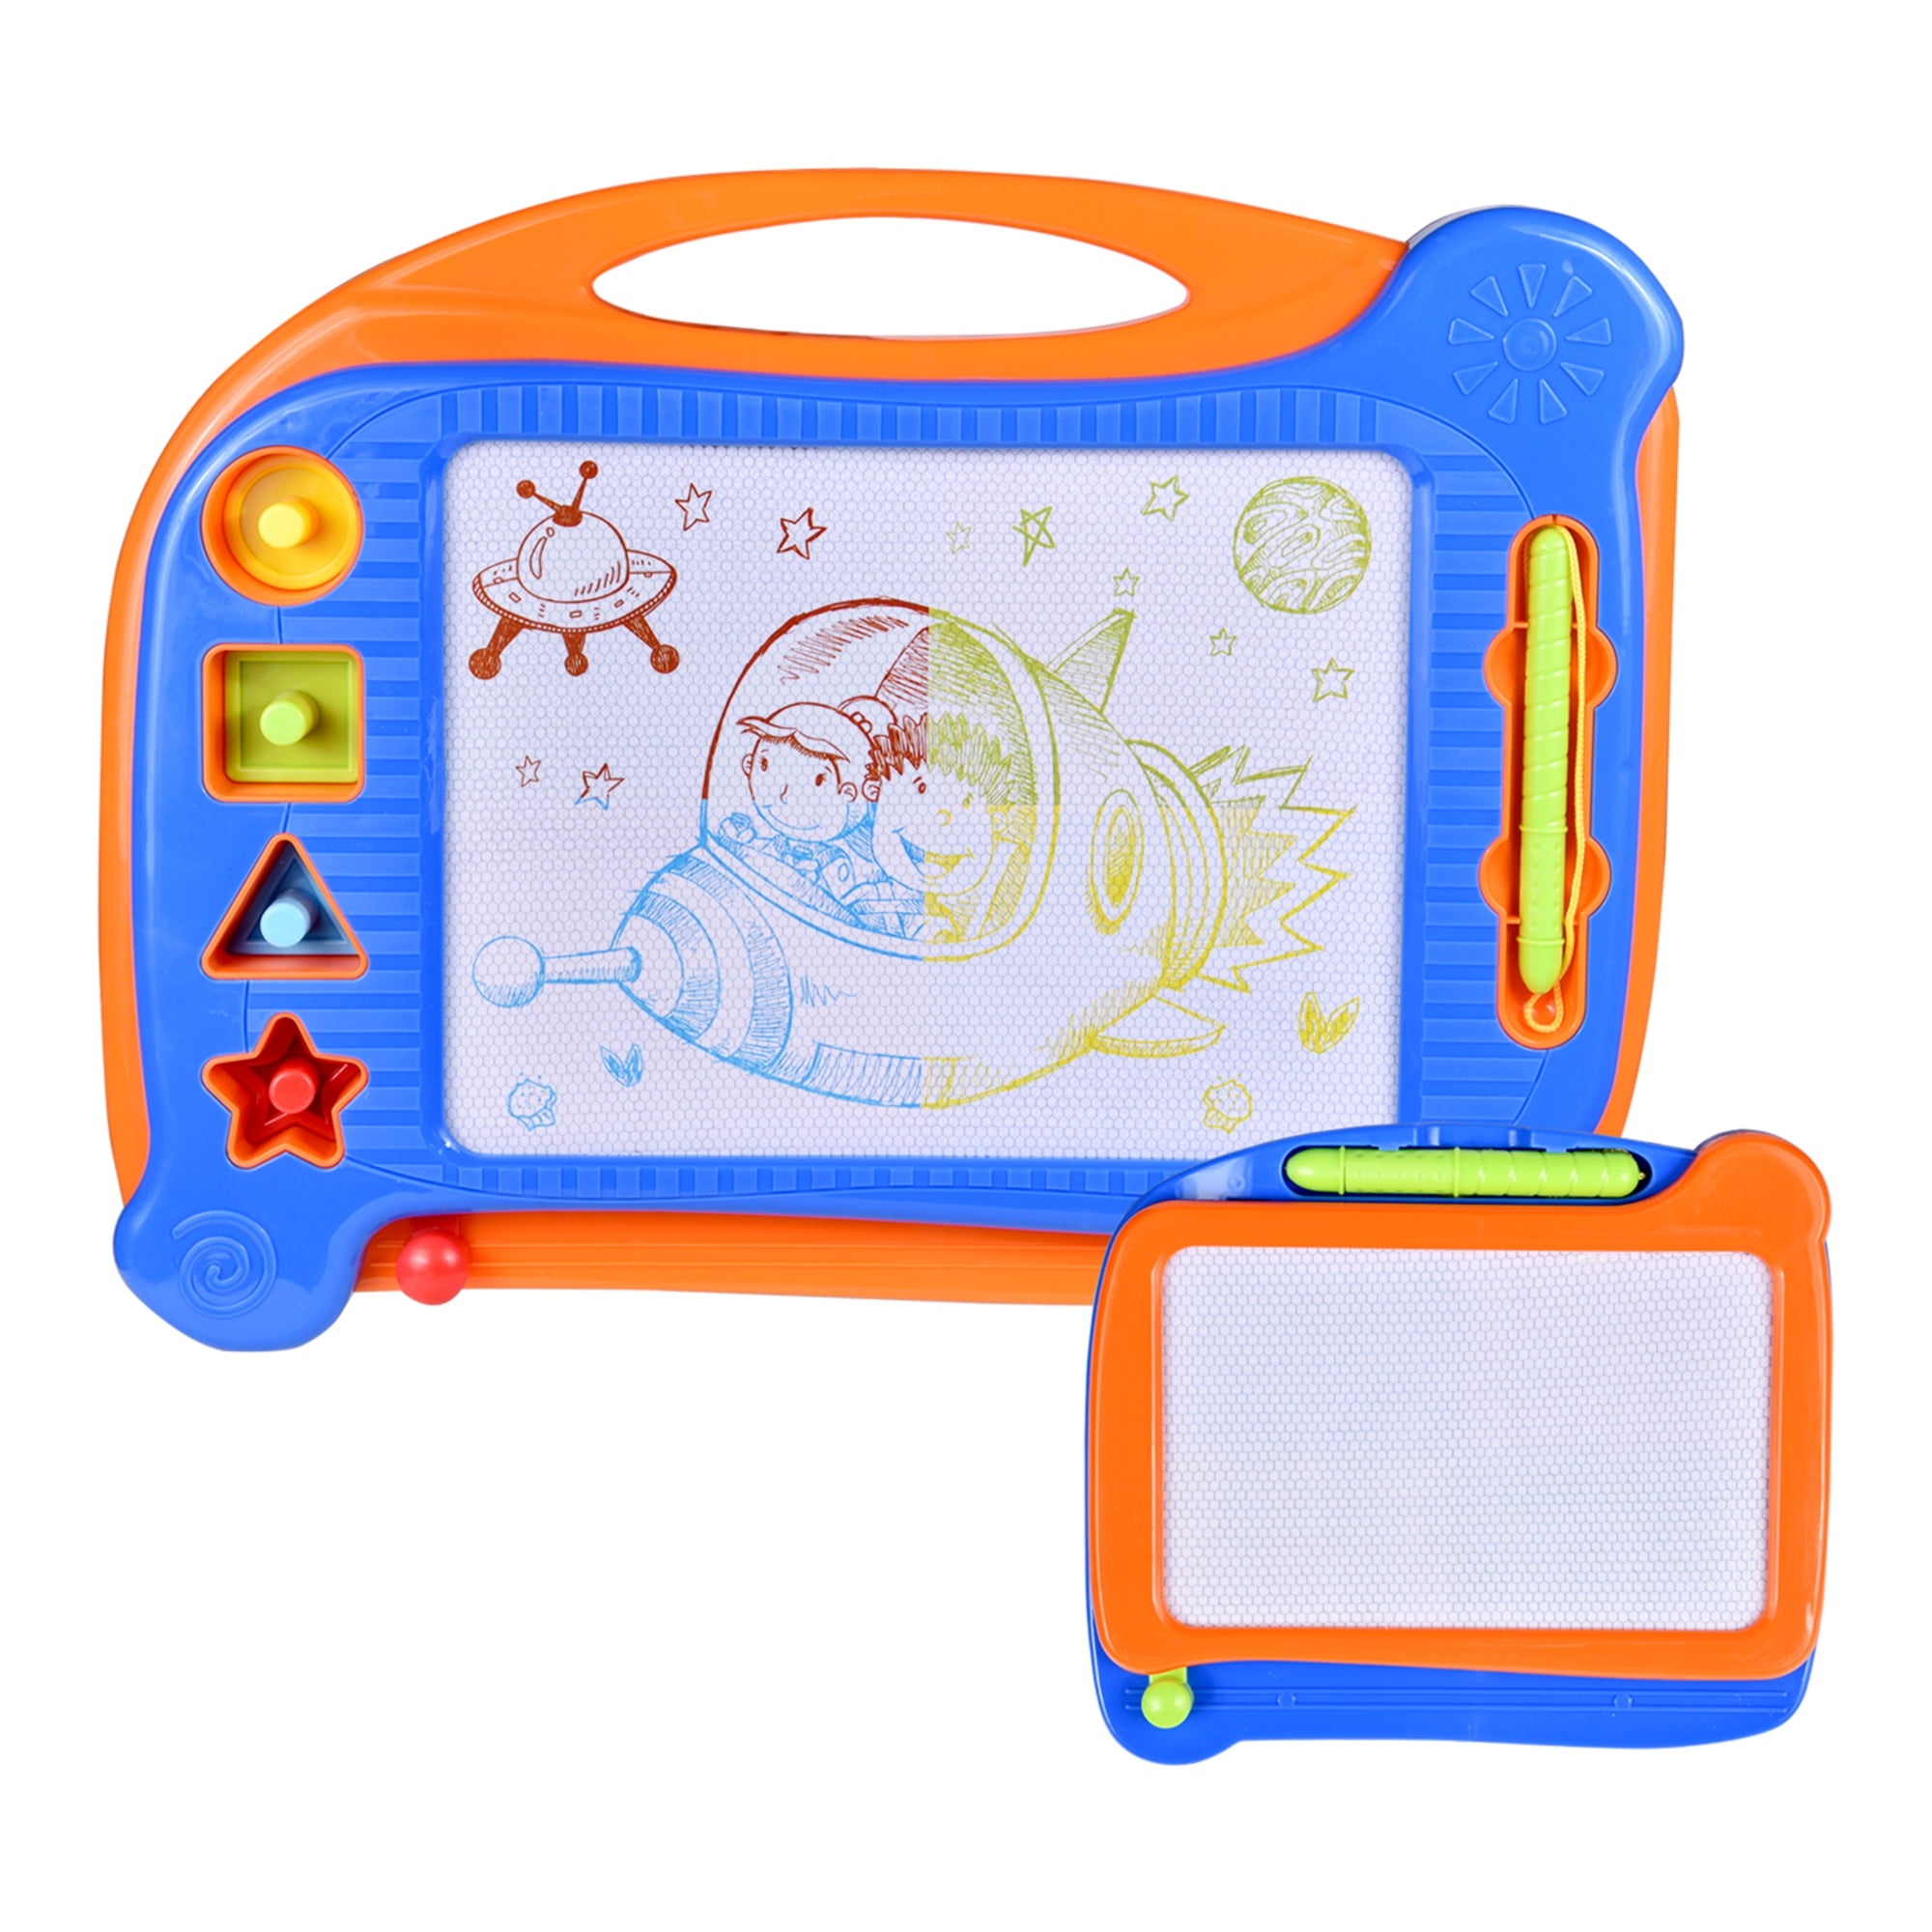 The Manga drawing Board Features a Extra Large Writing Board with 8 color zones & Erasable slider to etch a sketch for all kids ages 2-13 ToyVelt MegaToyBrand Magna Doodle Magnetic Drawing Board for Kids